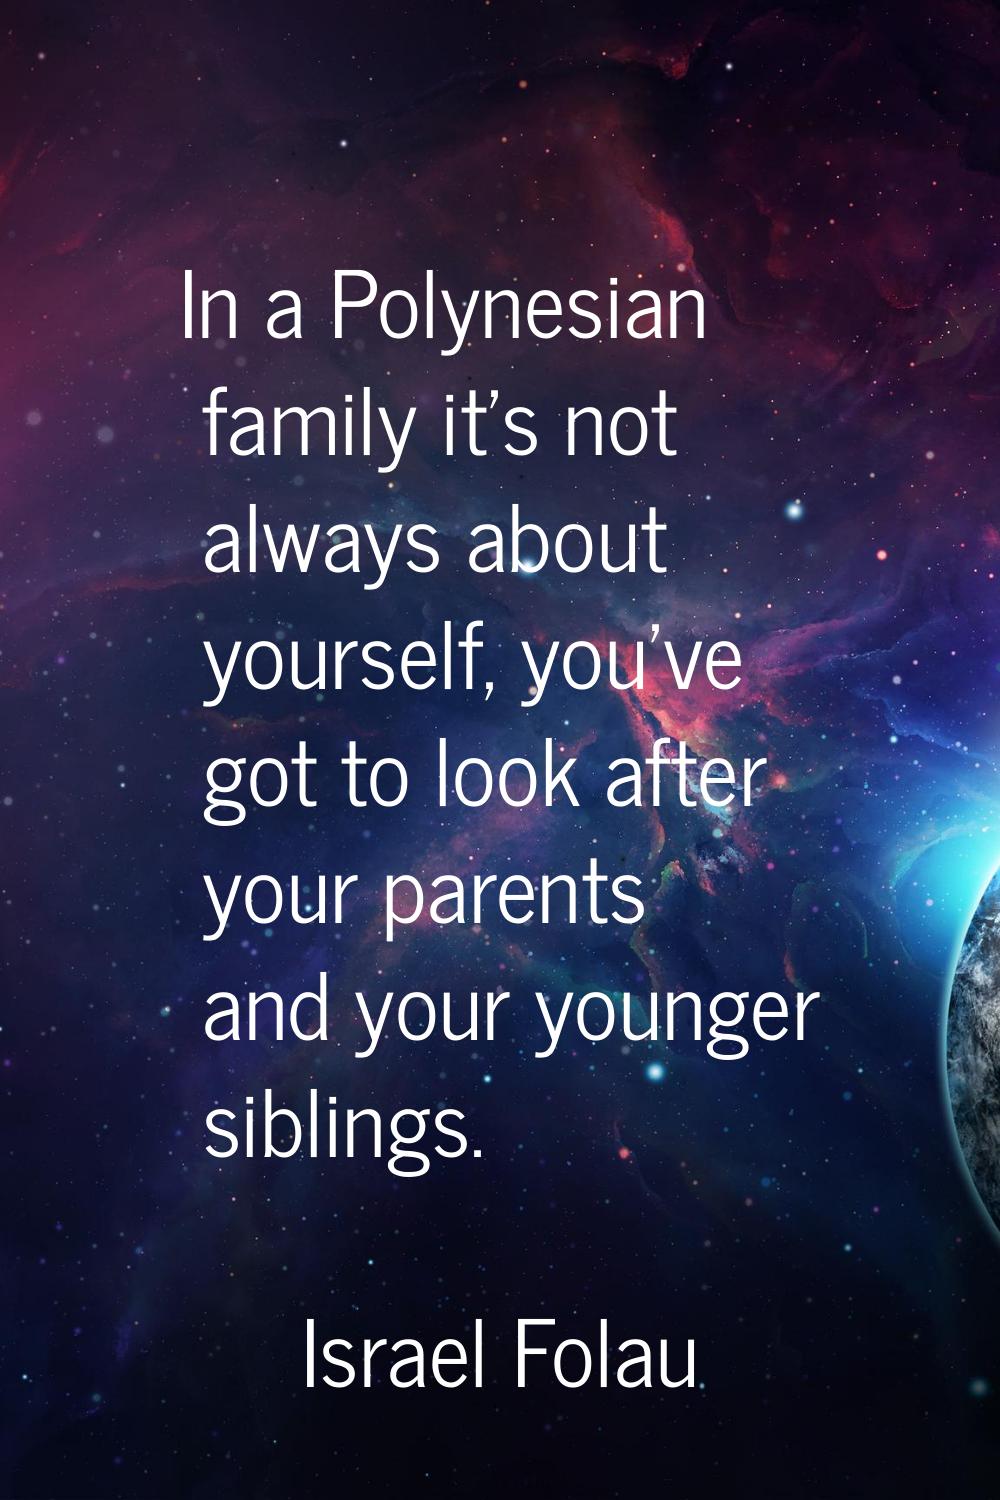 In a Polynesian family it's not always about yourself, you've got to look after your parents and yo